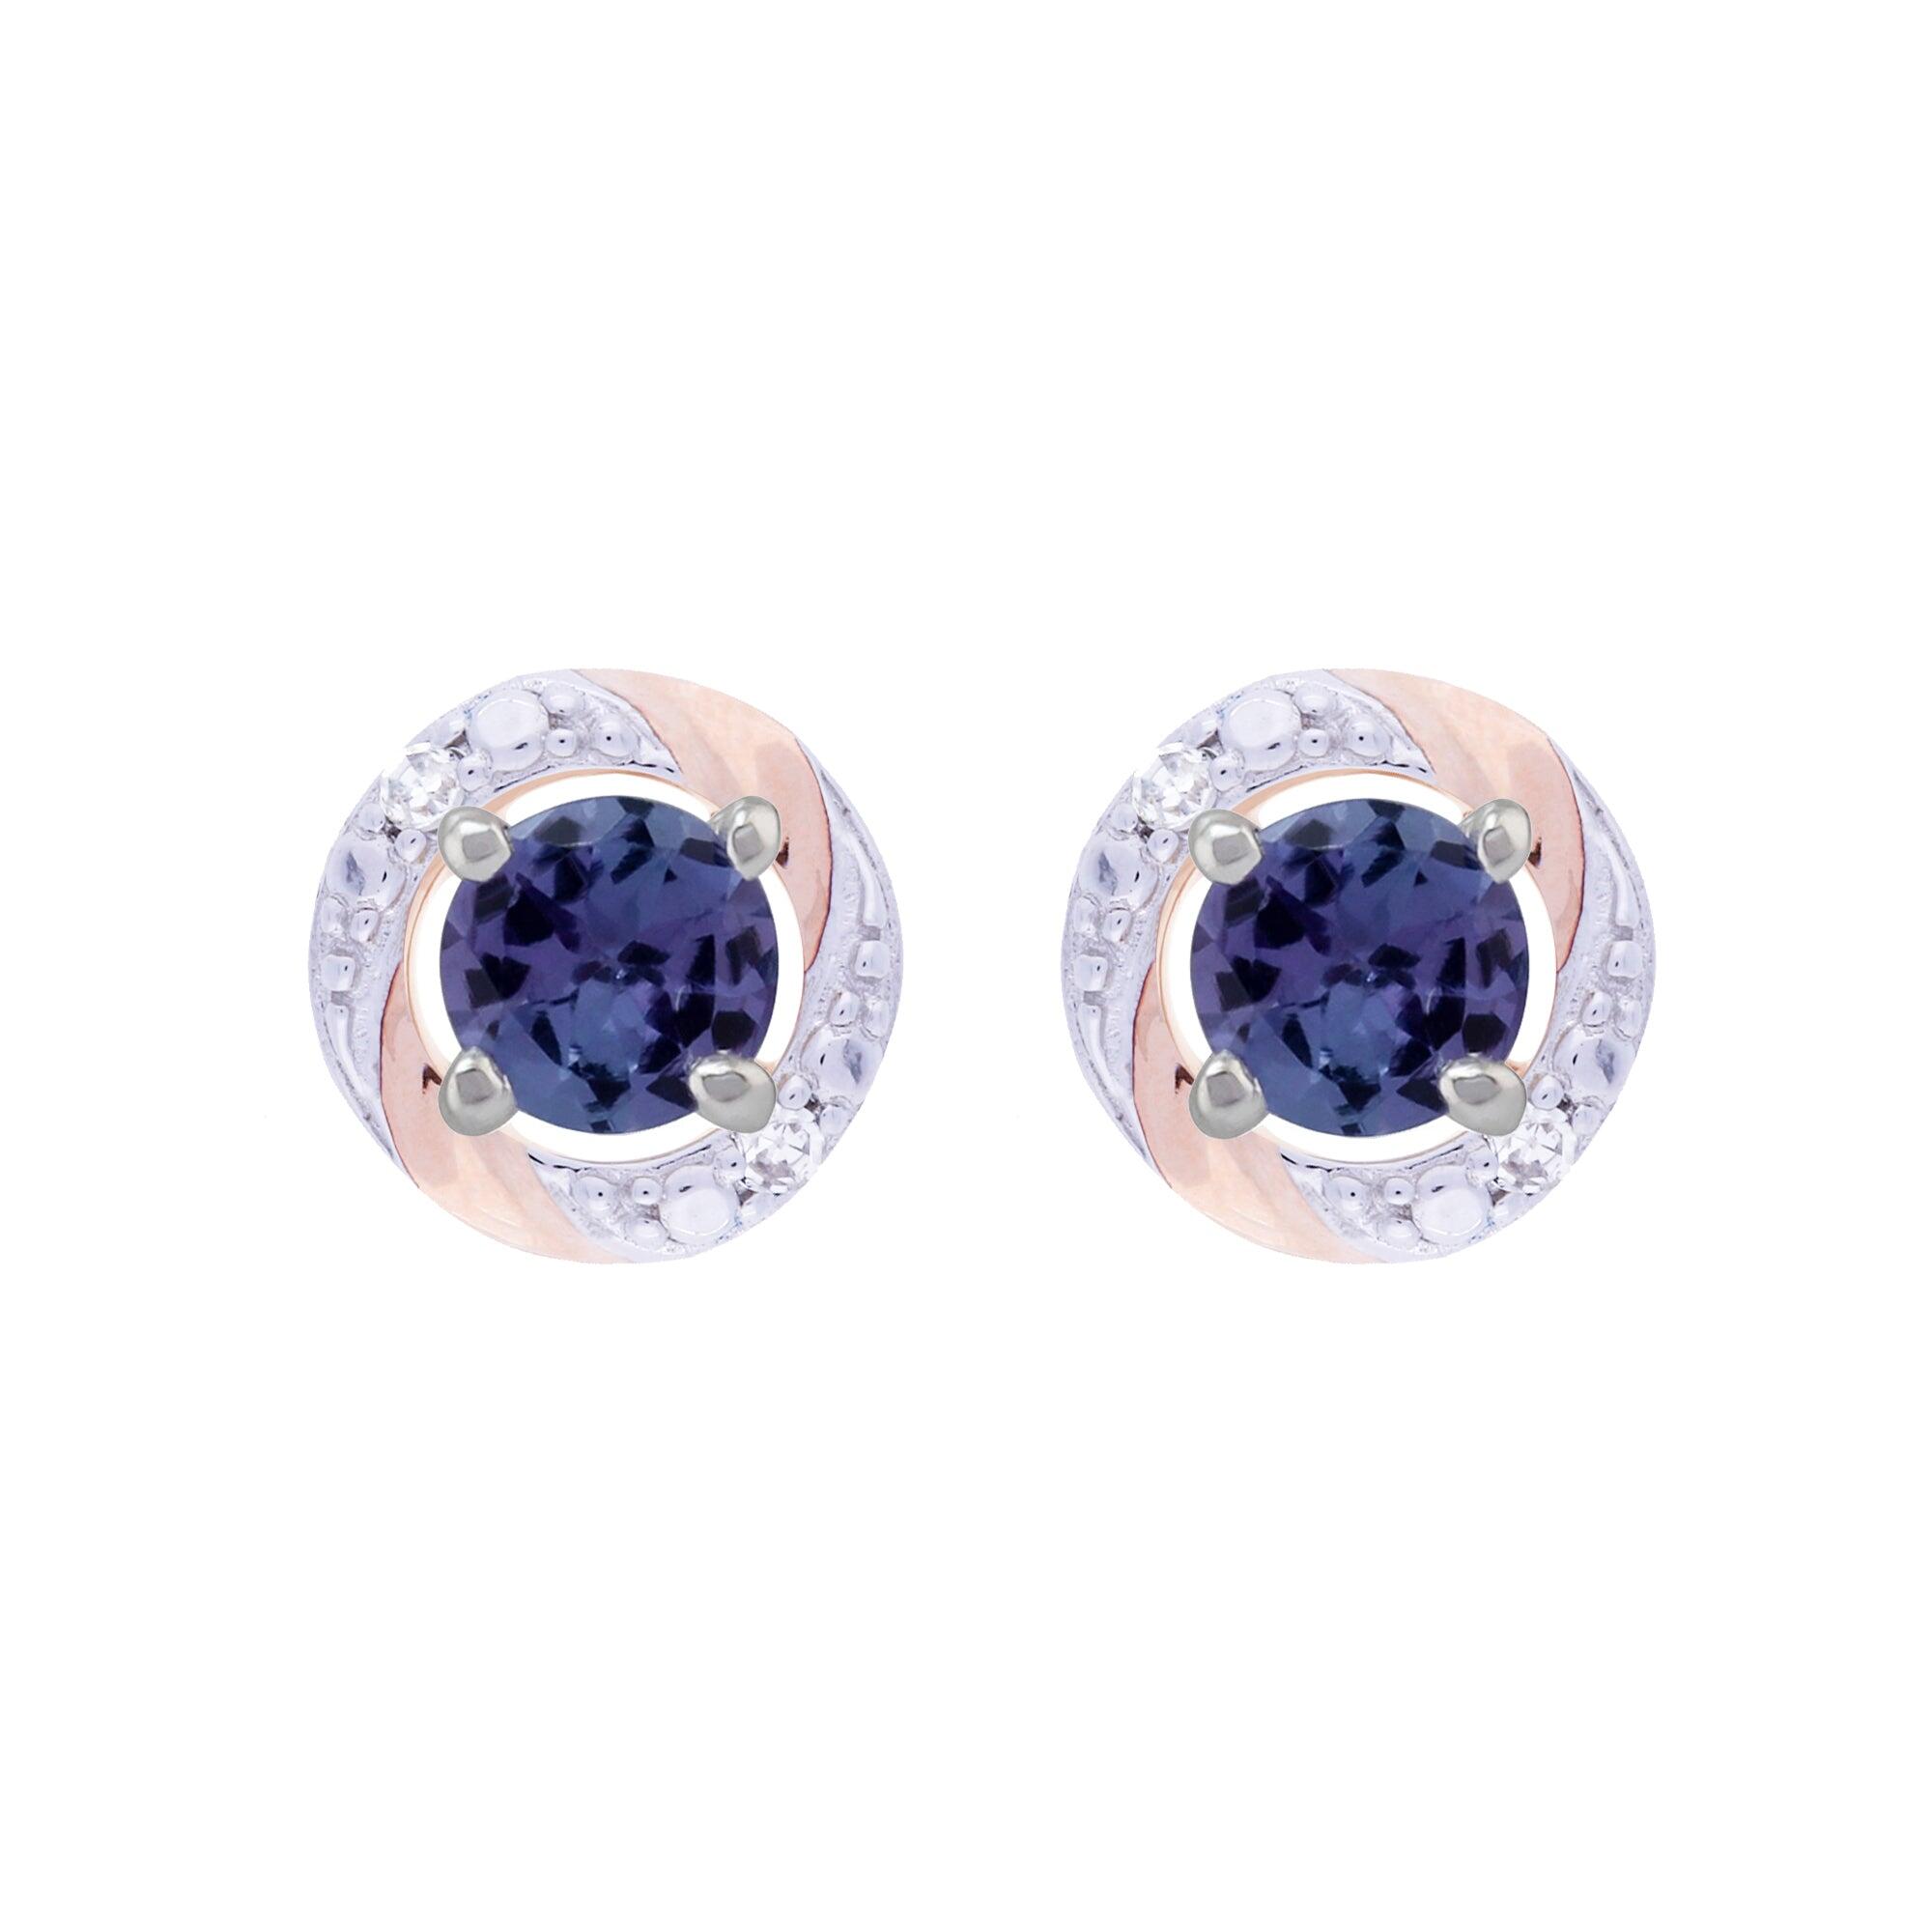 Classic Round Tanzanite Stud Earrings with Detachable Diamond Round Earrings Jacket Set in 9ct White Gold